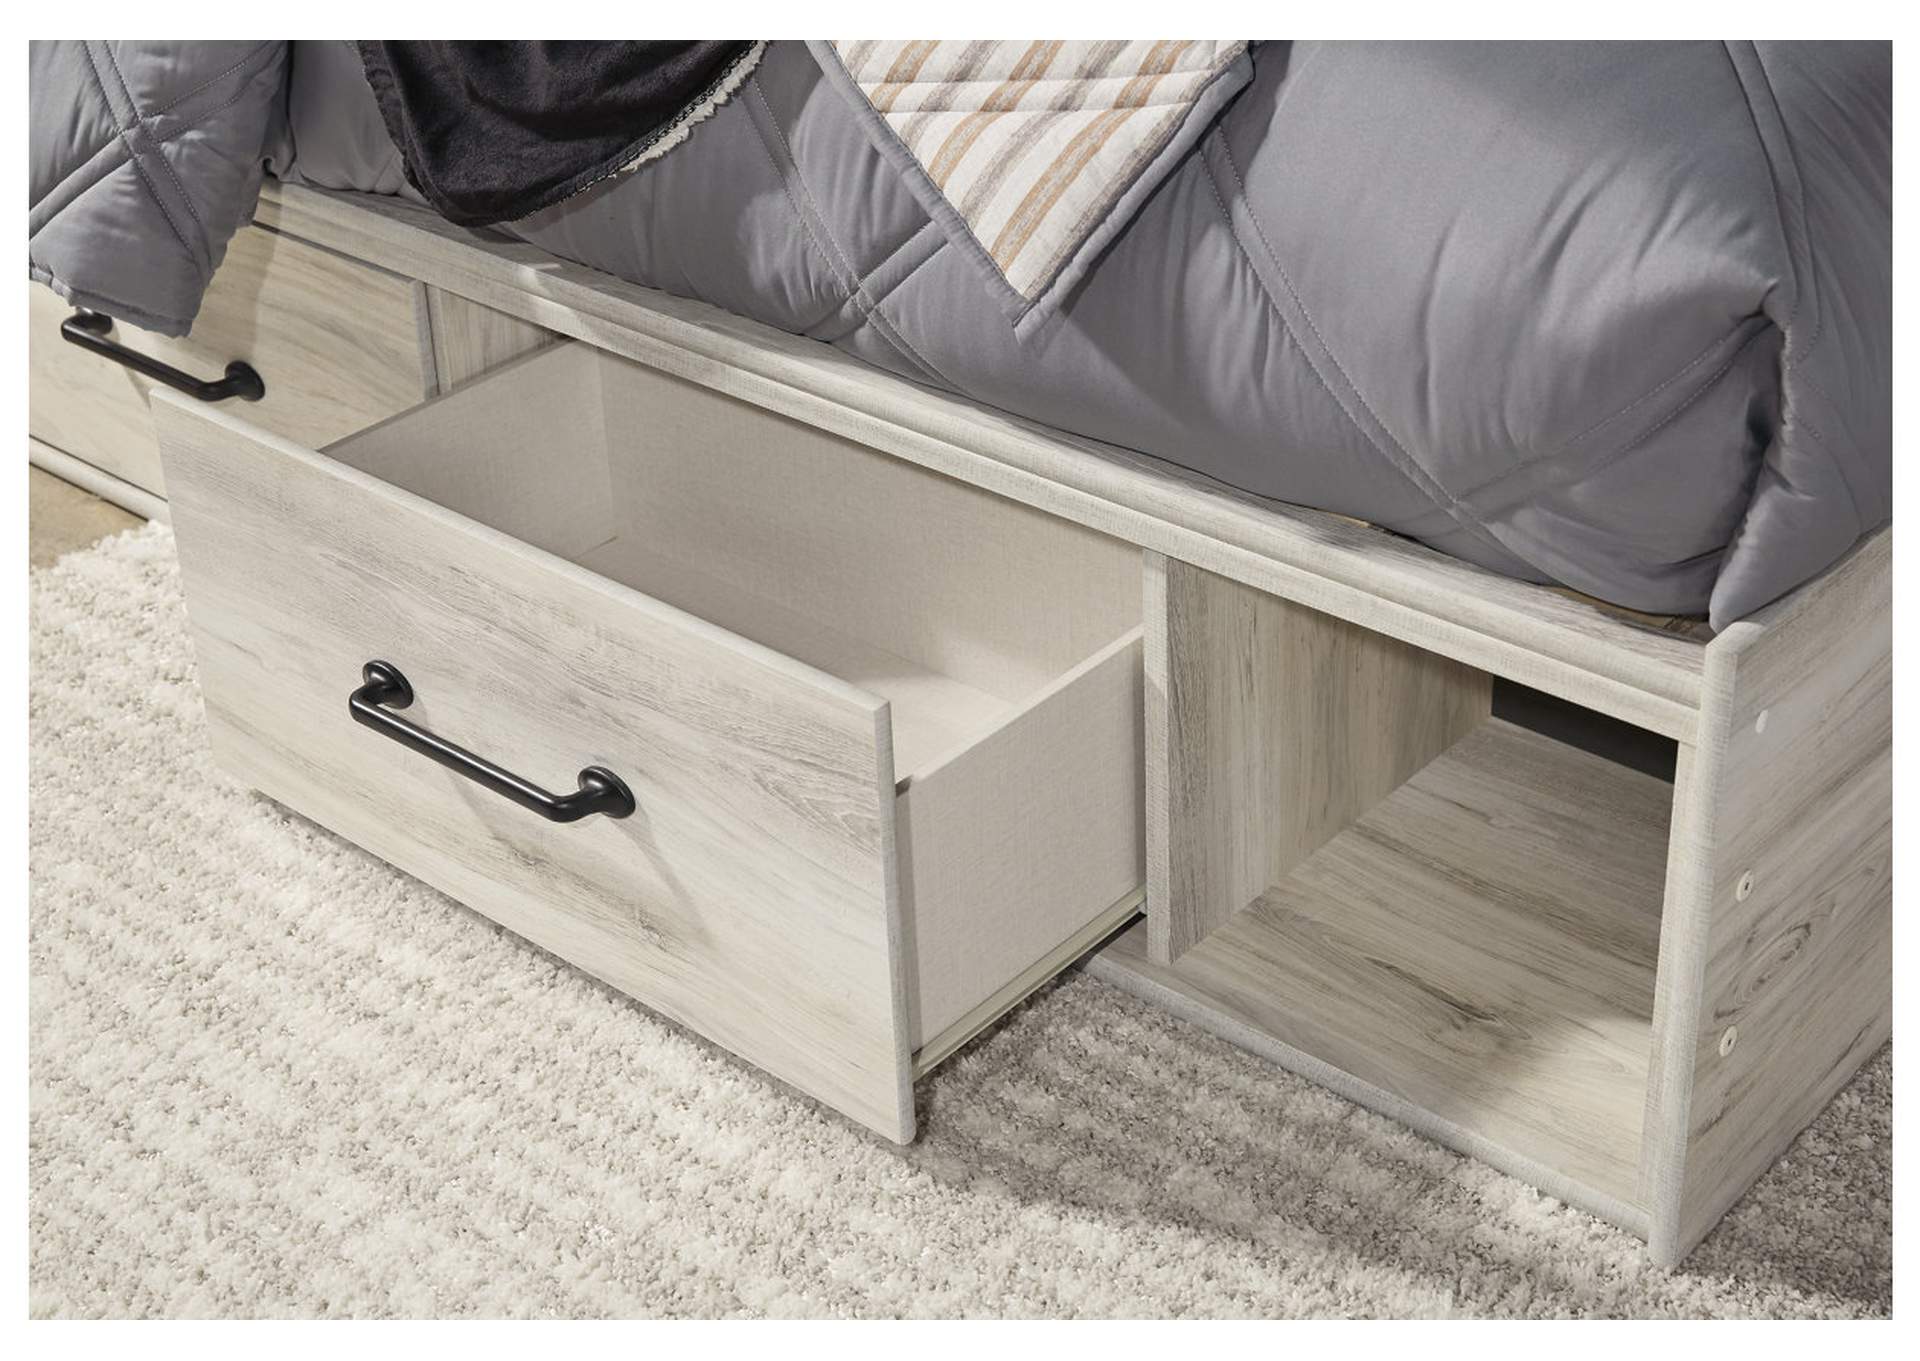 Cambeck Full Panel Bed with 4 Storage Drawers with Mirrored Dresser and Chest,Signature Design By Ashley